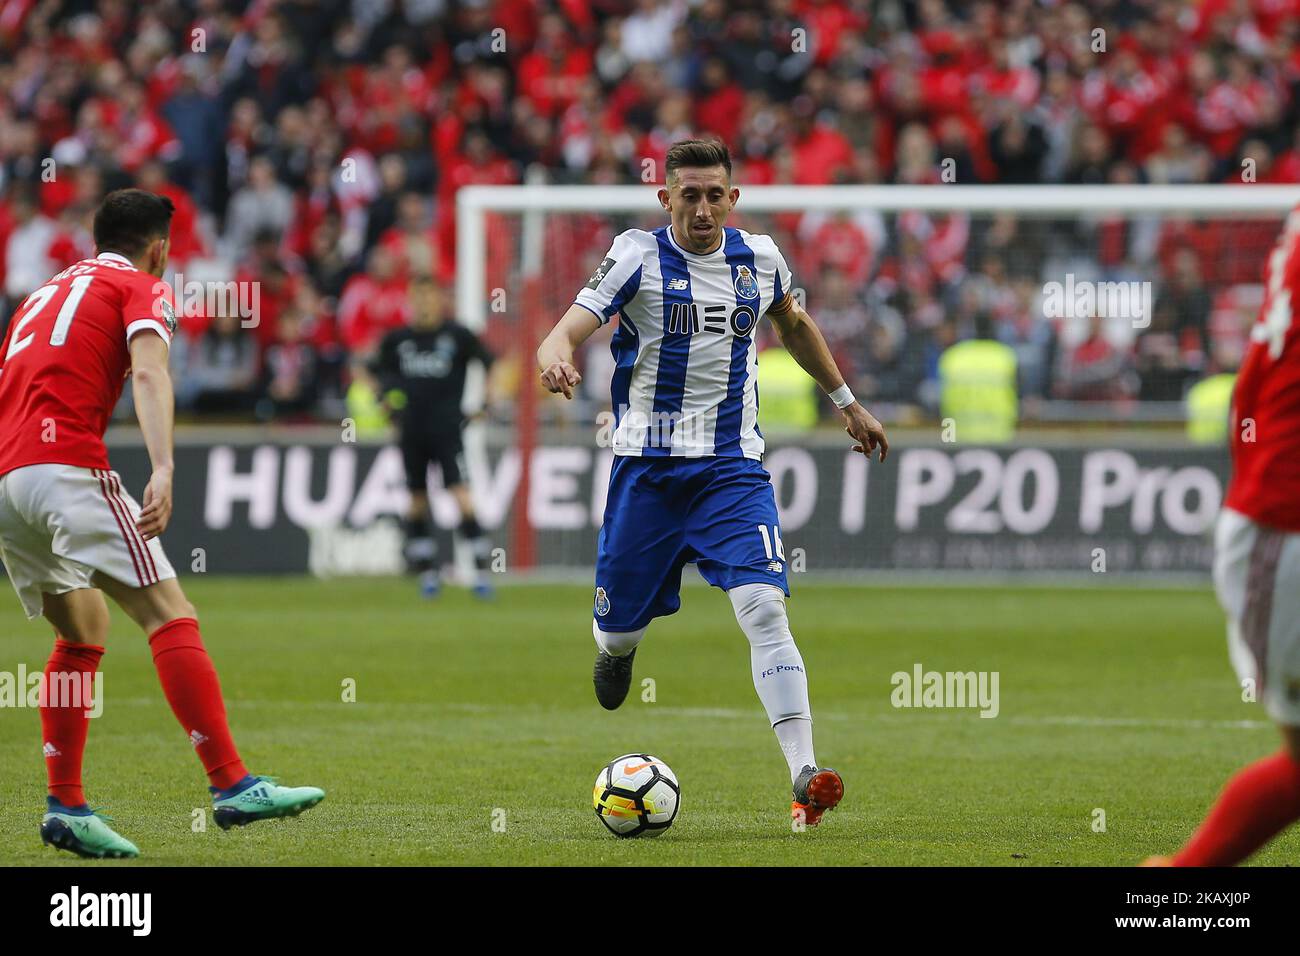 FC Porto Midfielder Hector Herrera from Mexico during the Premier League 2017/18 match between SL Benfica v FC Porto, at Luz Stadium in Lisbon, Portugal on April 15, 2018. (Photo by Bruno Barros / DPI / NurPhoto) Stock Photo